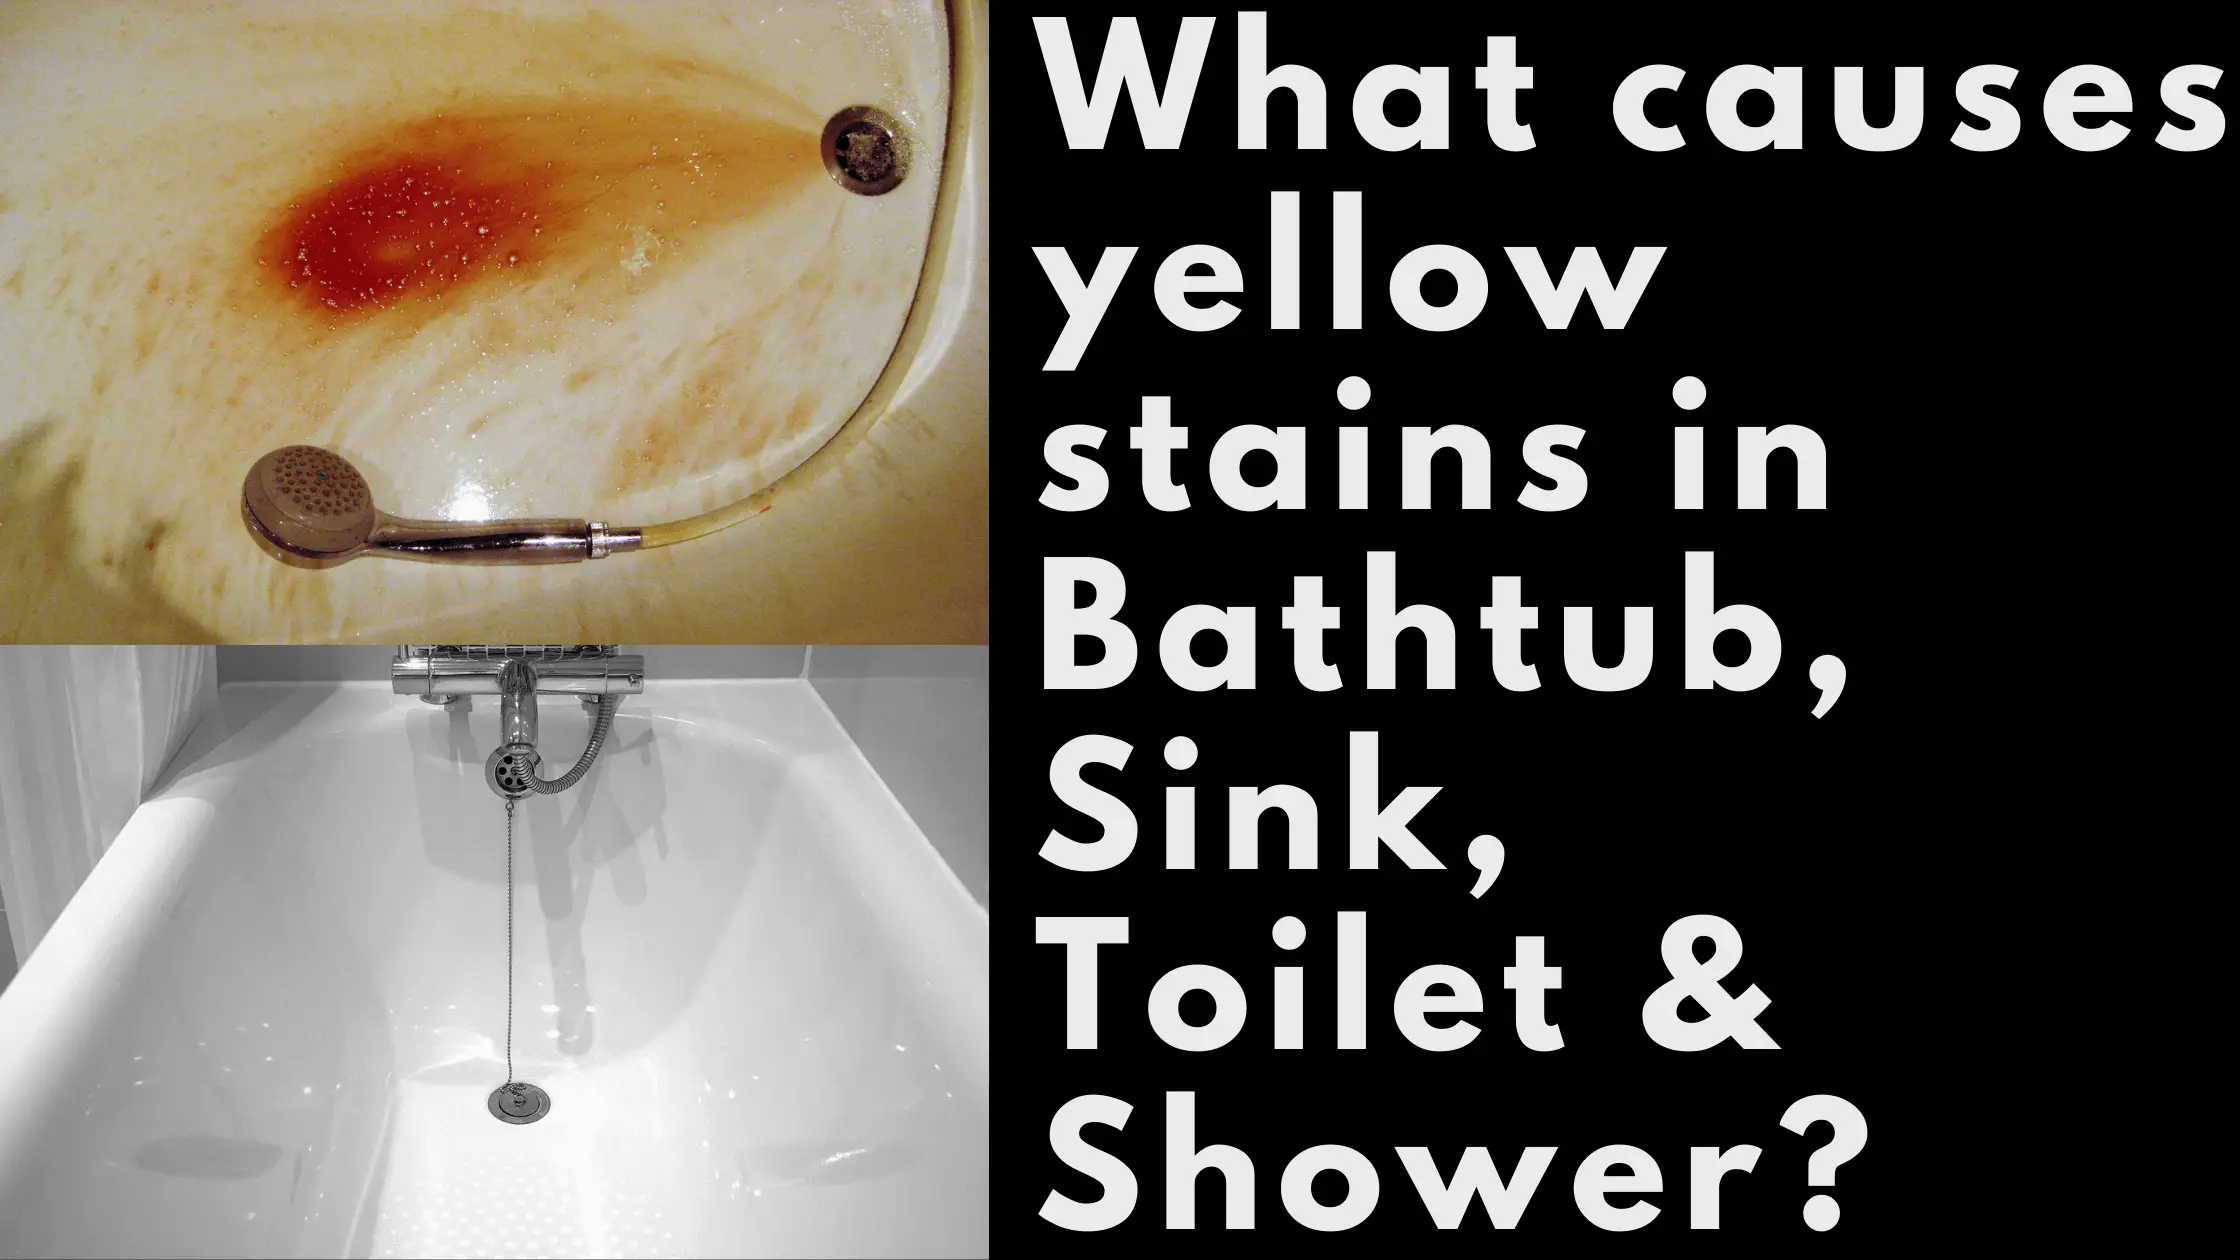 What causes yellow stains in bathtub